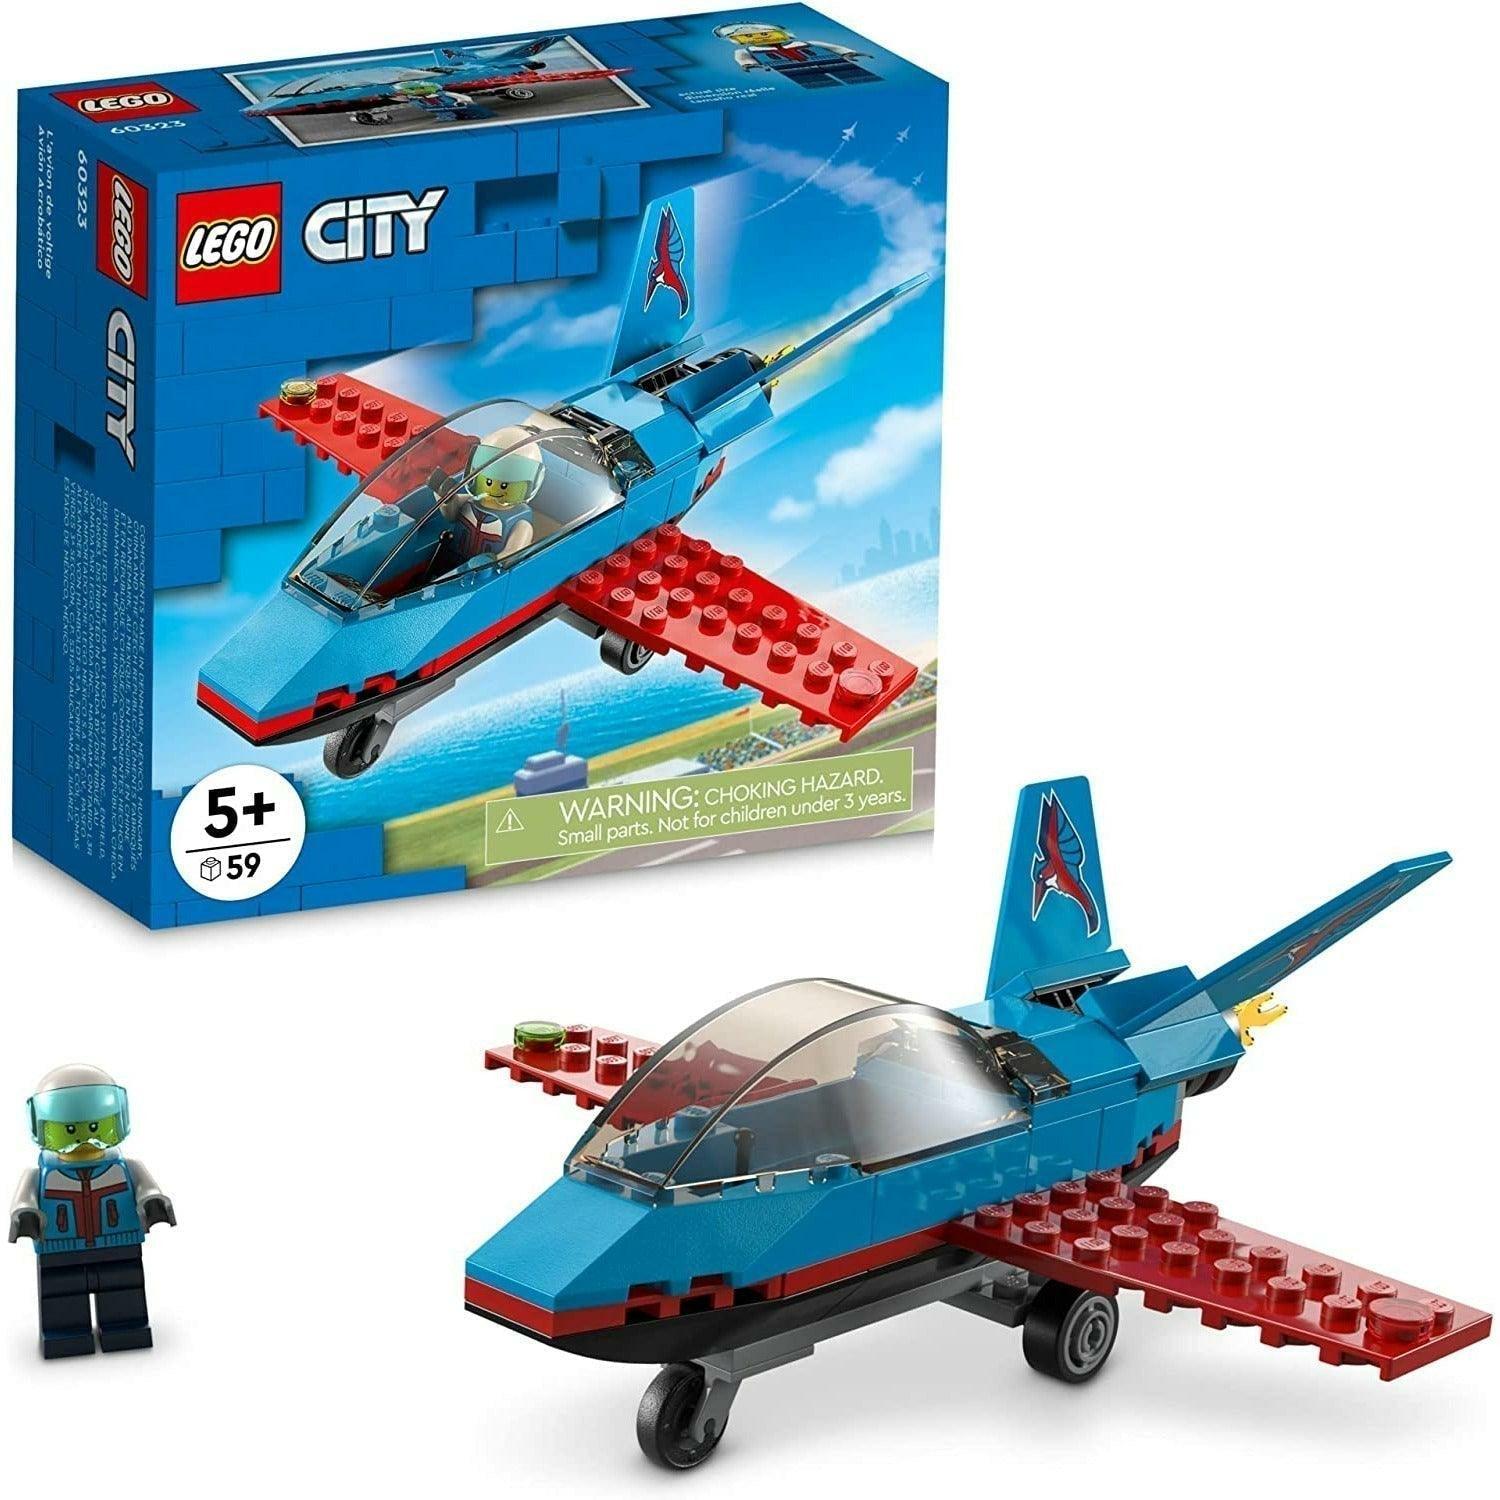 LEGO City Stunt Plane 60323 Building Kit; Toy Jet with Decorated Tail Fins and an Opening Cockpit, Plus a Pilot Minifigure with a Helmet (59 Pieces) - BumbleToys - 5-7 Years, Boys, City, EXO, LEGO